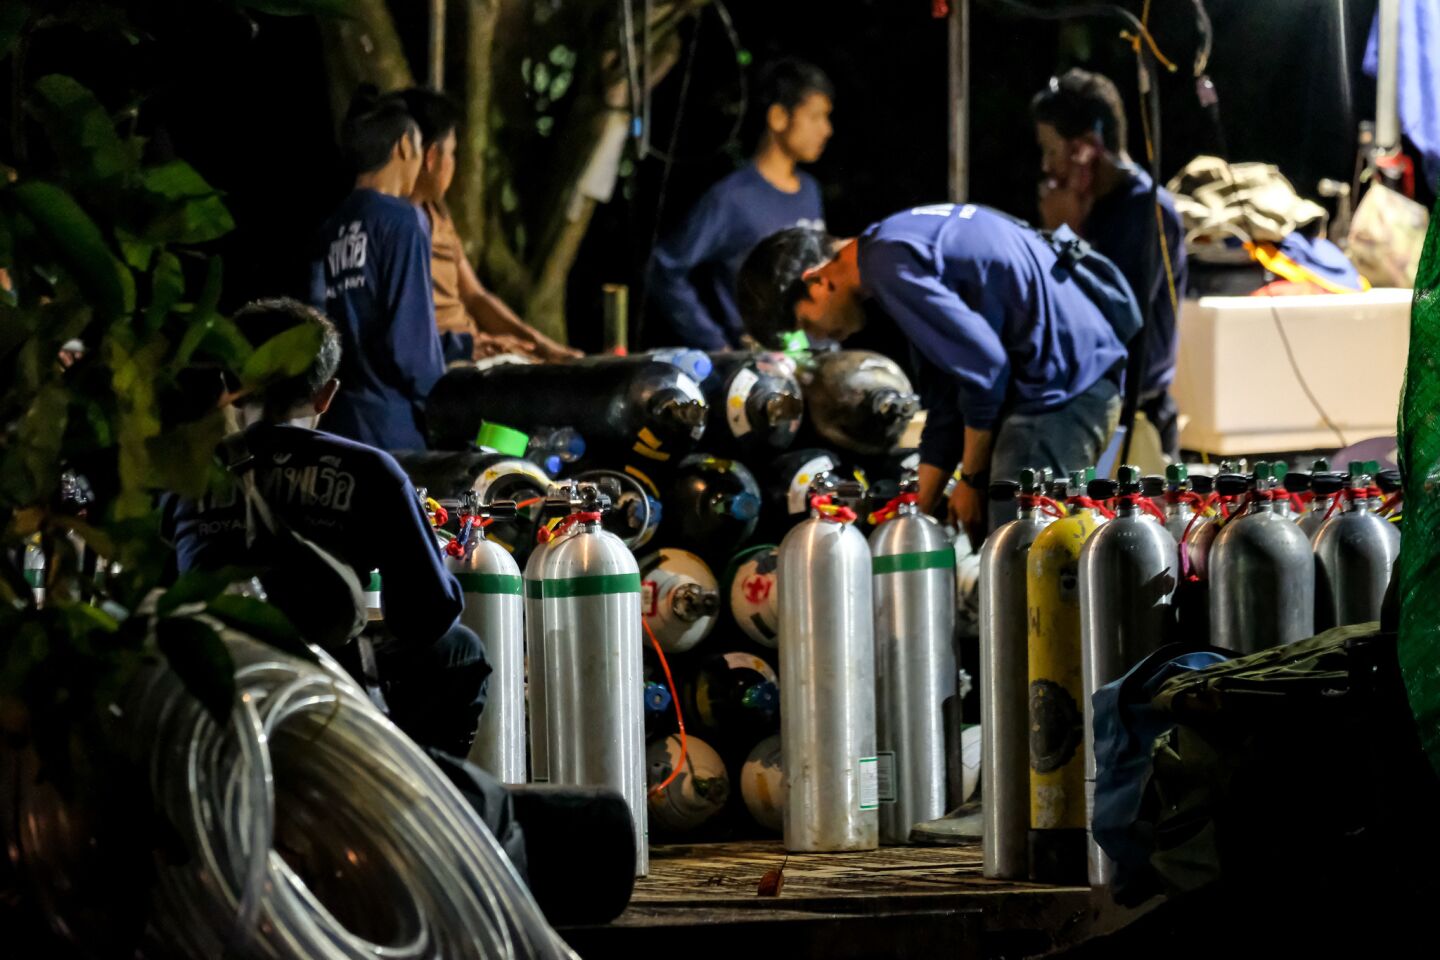 Diving cylinders are prepared at a makeshift camp at the entrance of Tham Luang Nang Non caves.